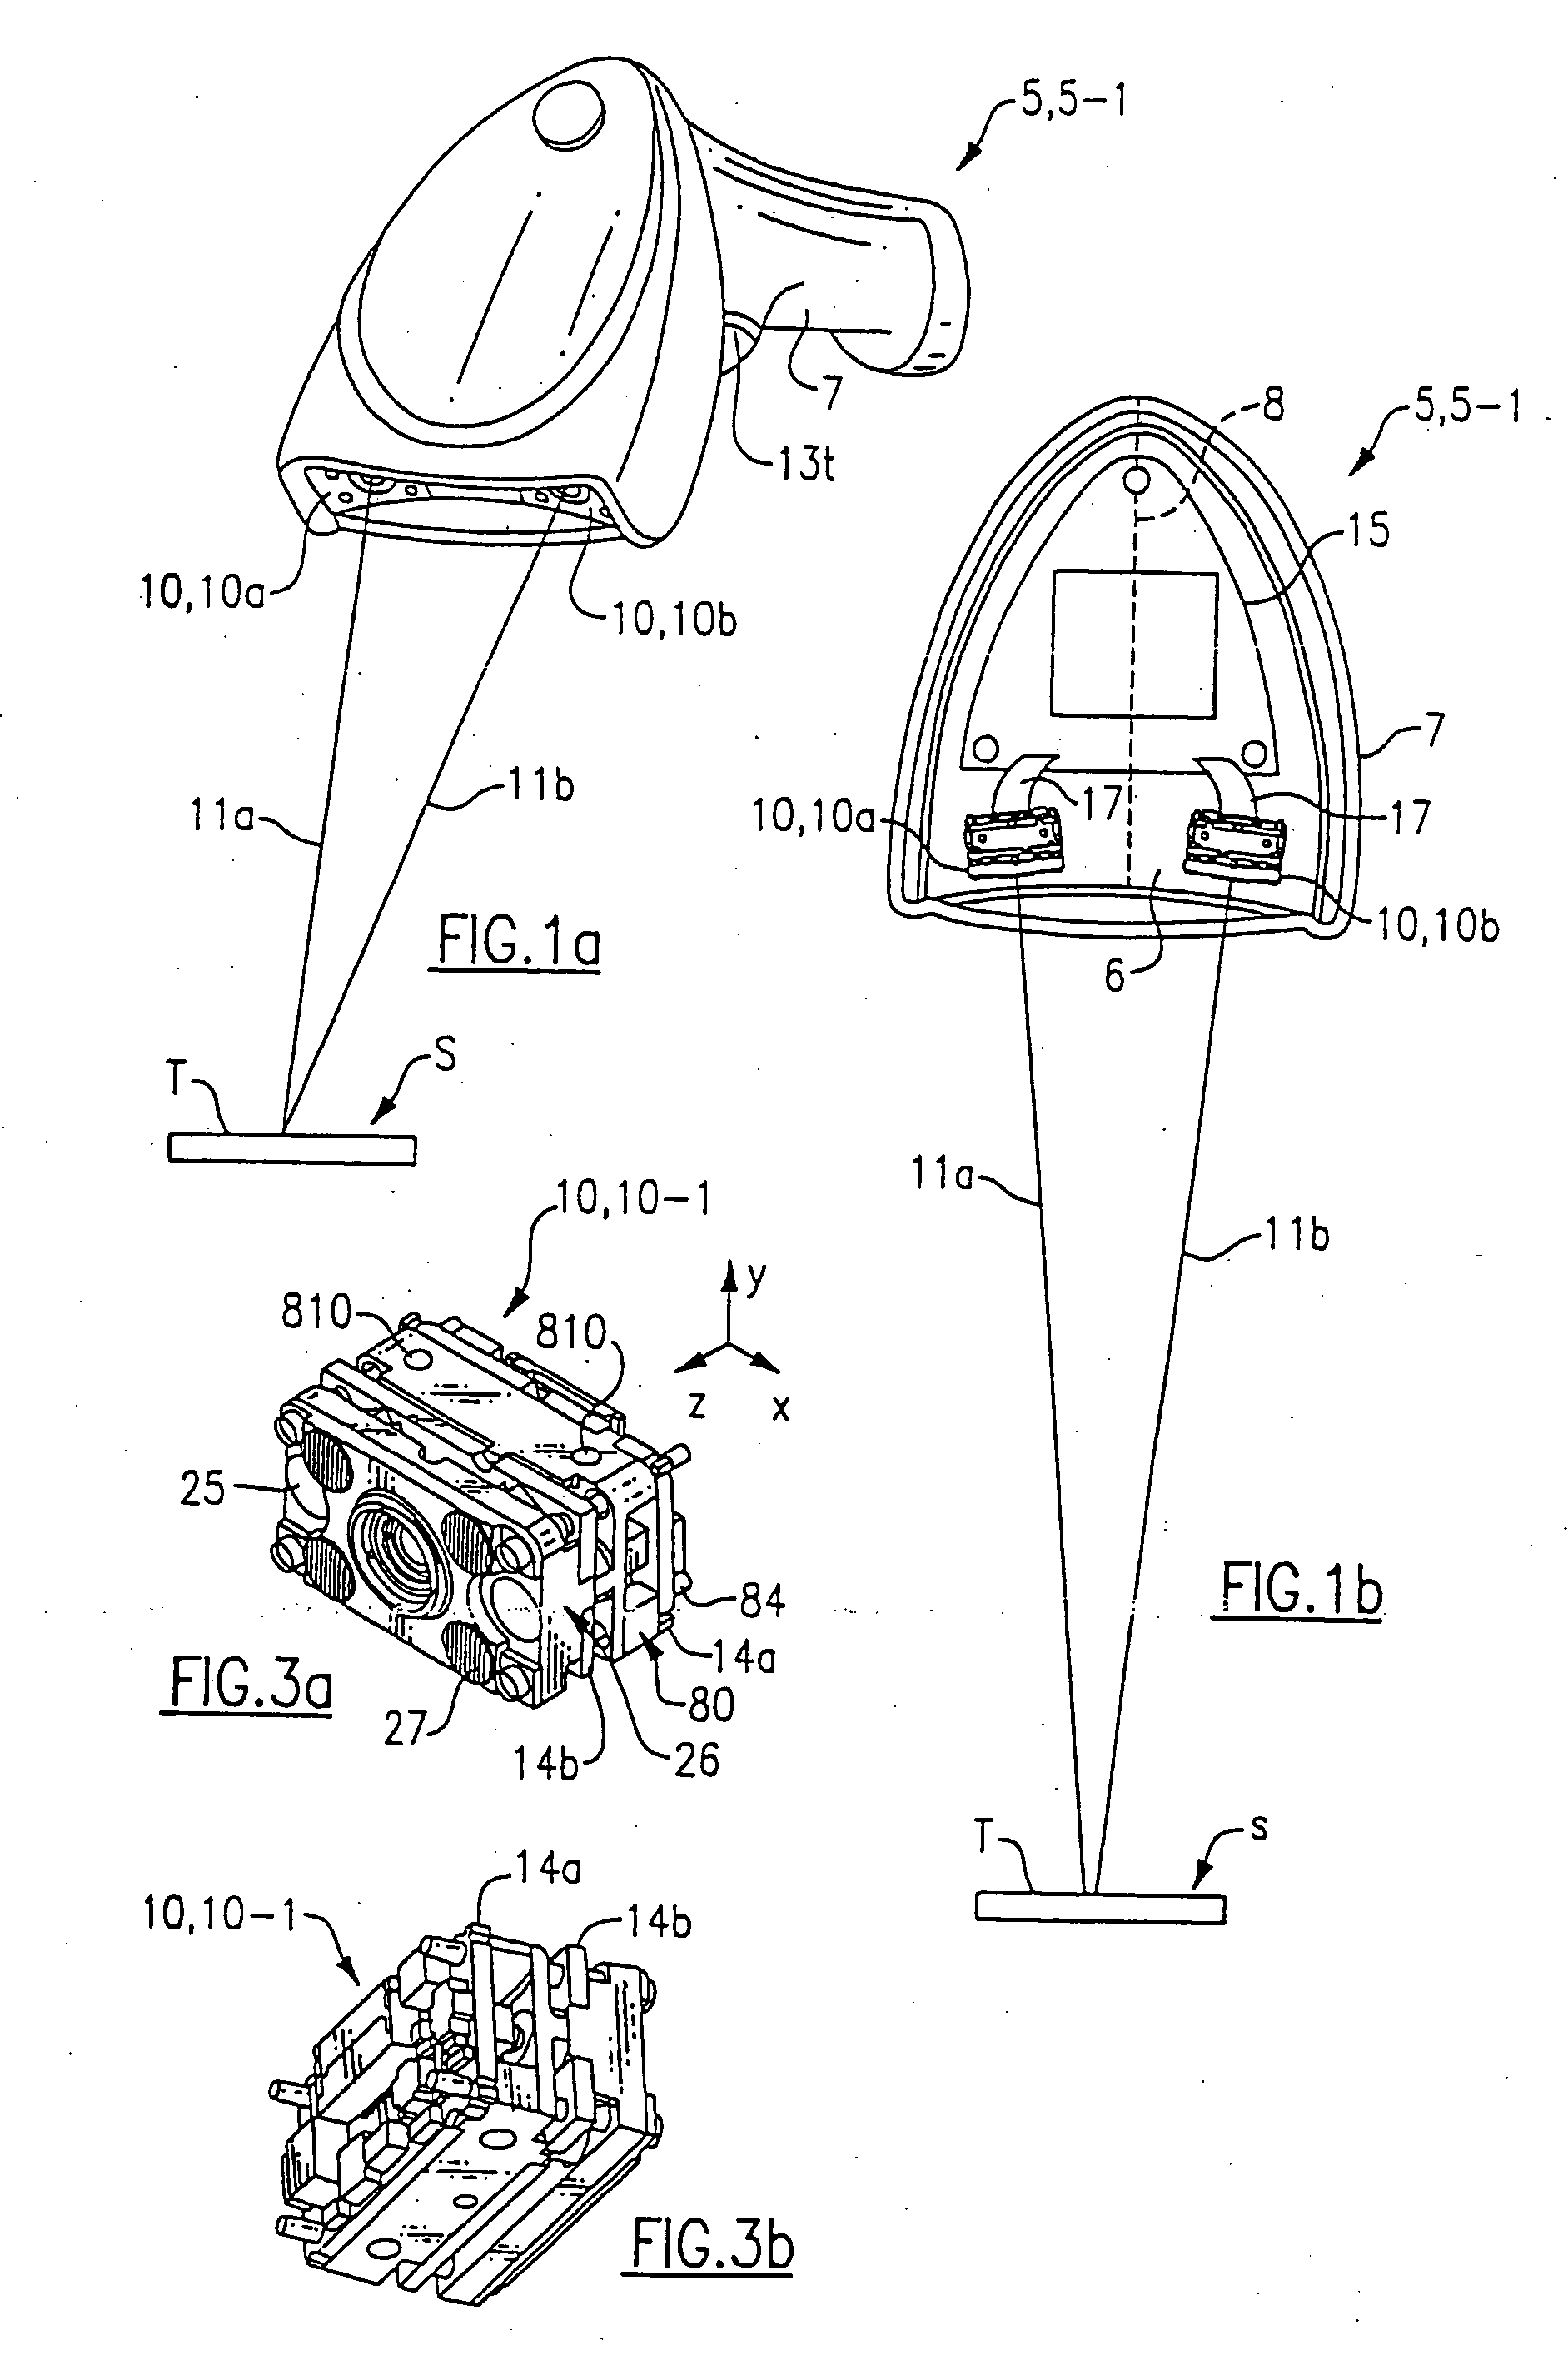 Optical reader having a plurality of imaging modules